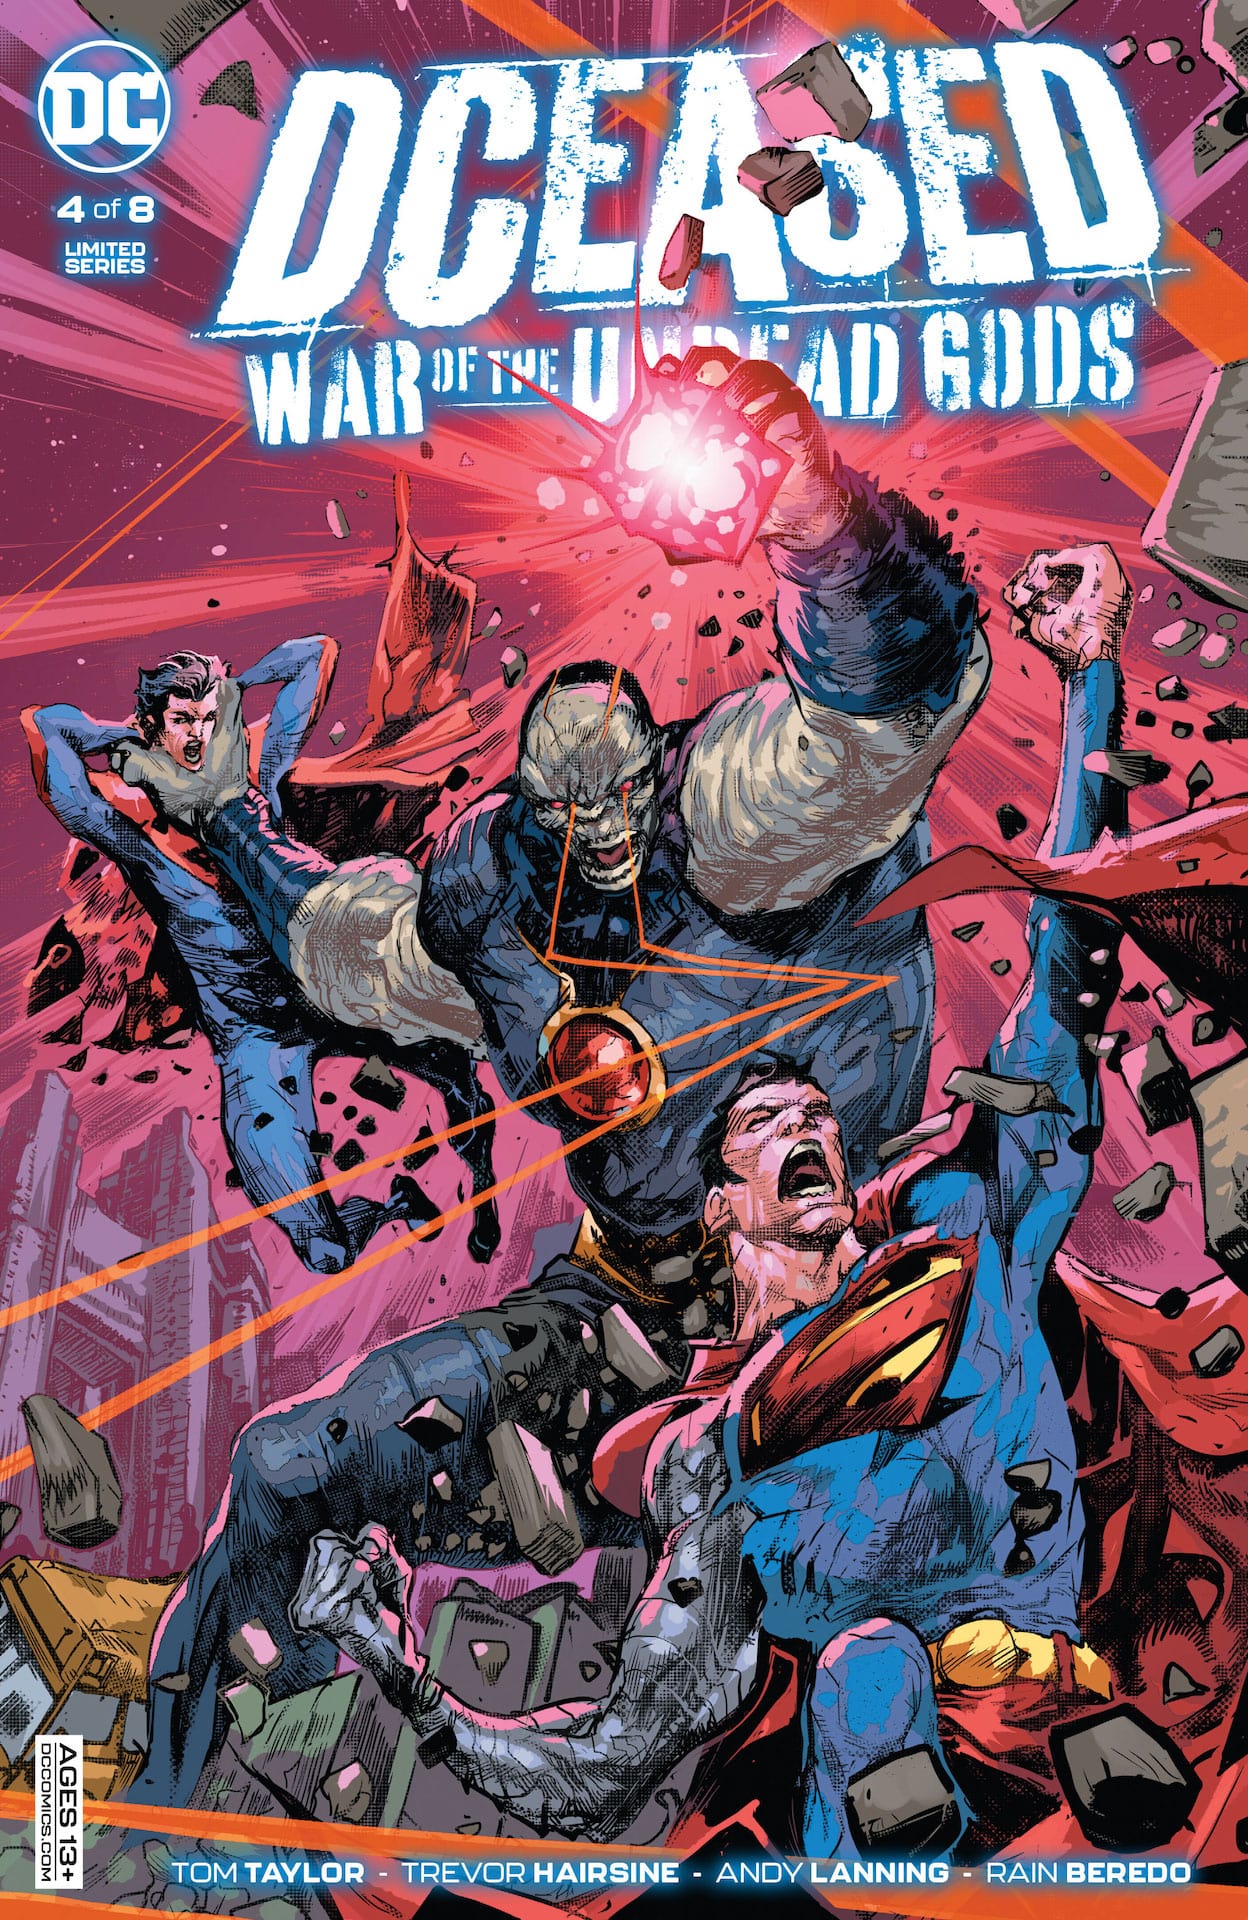 DC Preview: DCeased: War of the Undead Gods #4